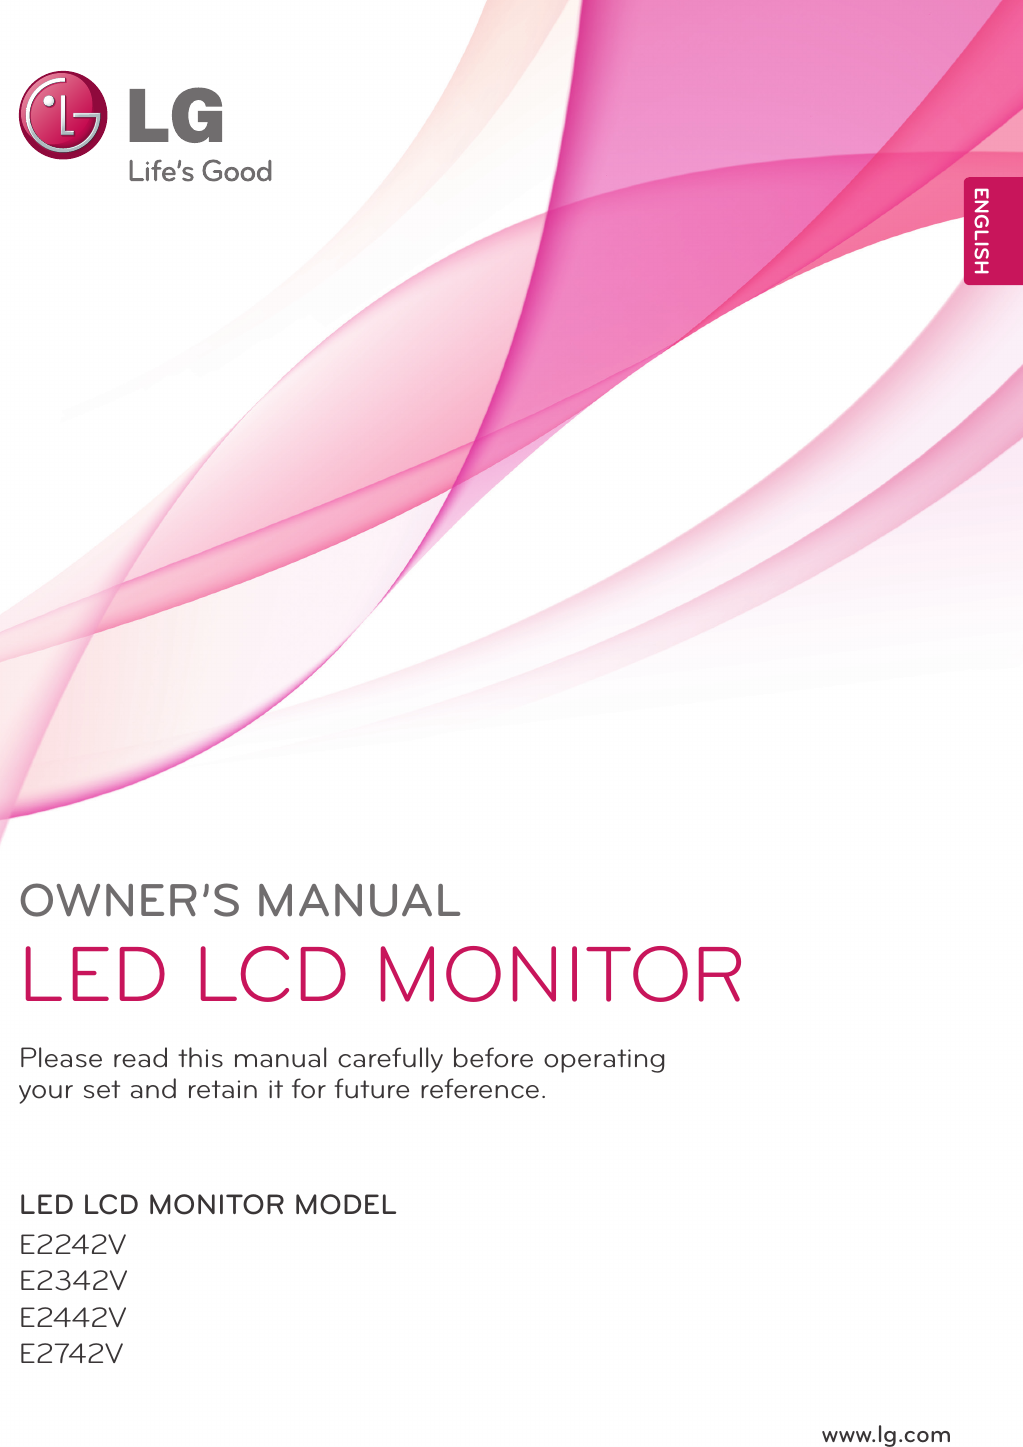 www.lg.comOWNER’S MANUALLED LCD MONITORE2242VE2342VE2442VE2742VPlease read this manual carefully before operating your set and retain it for future reference.LED LCD MONITOR MODELENGLISH